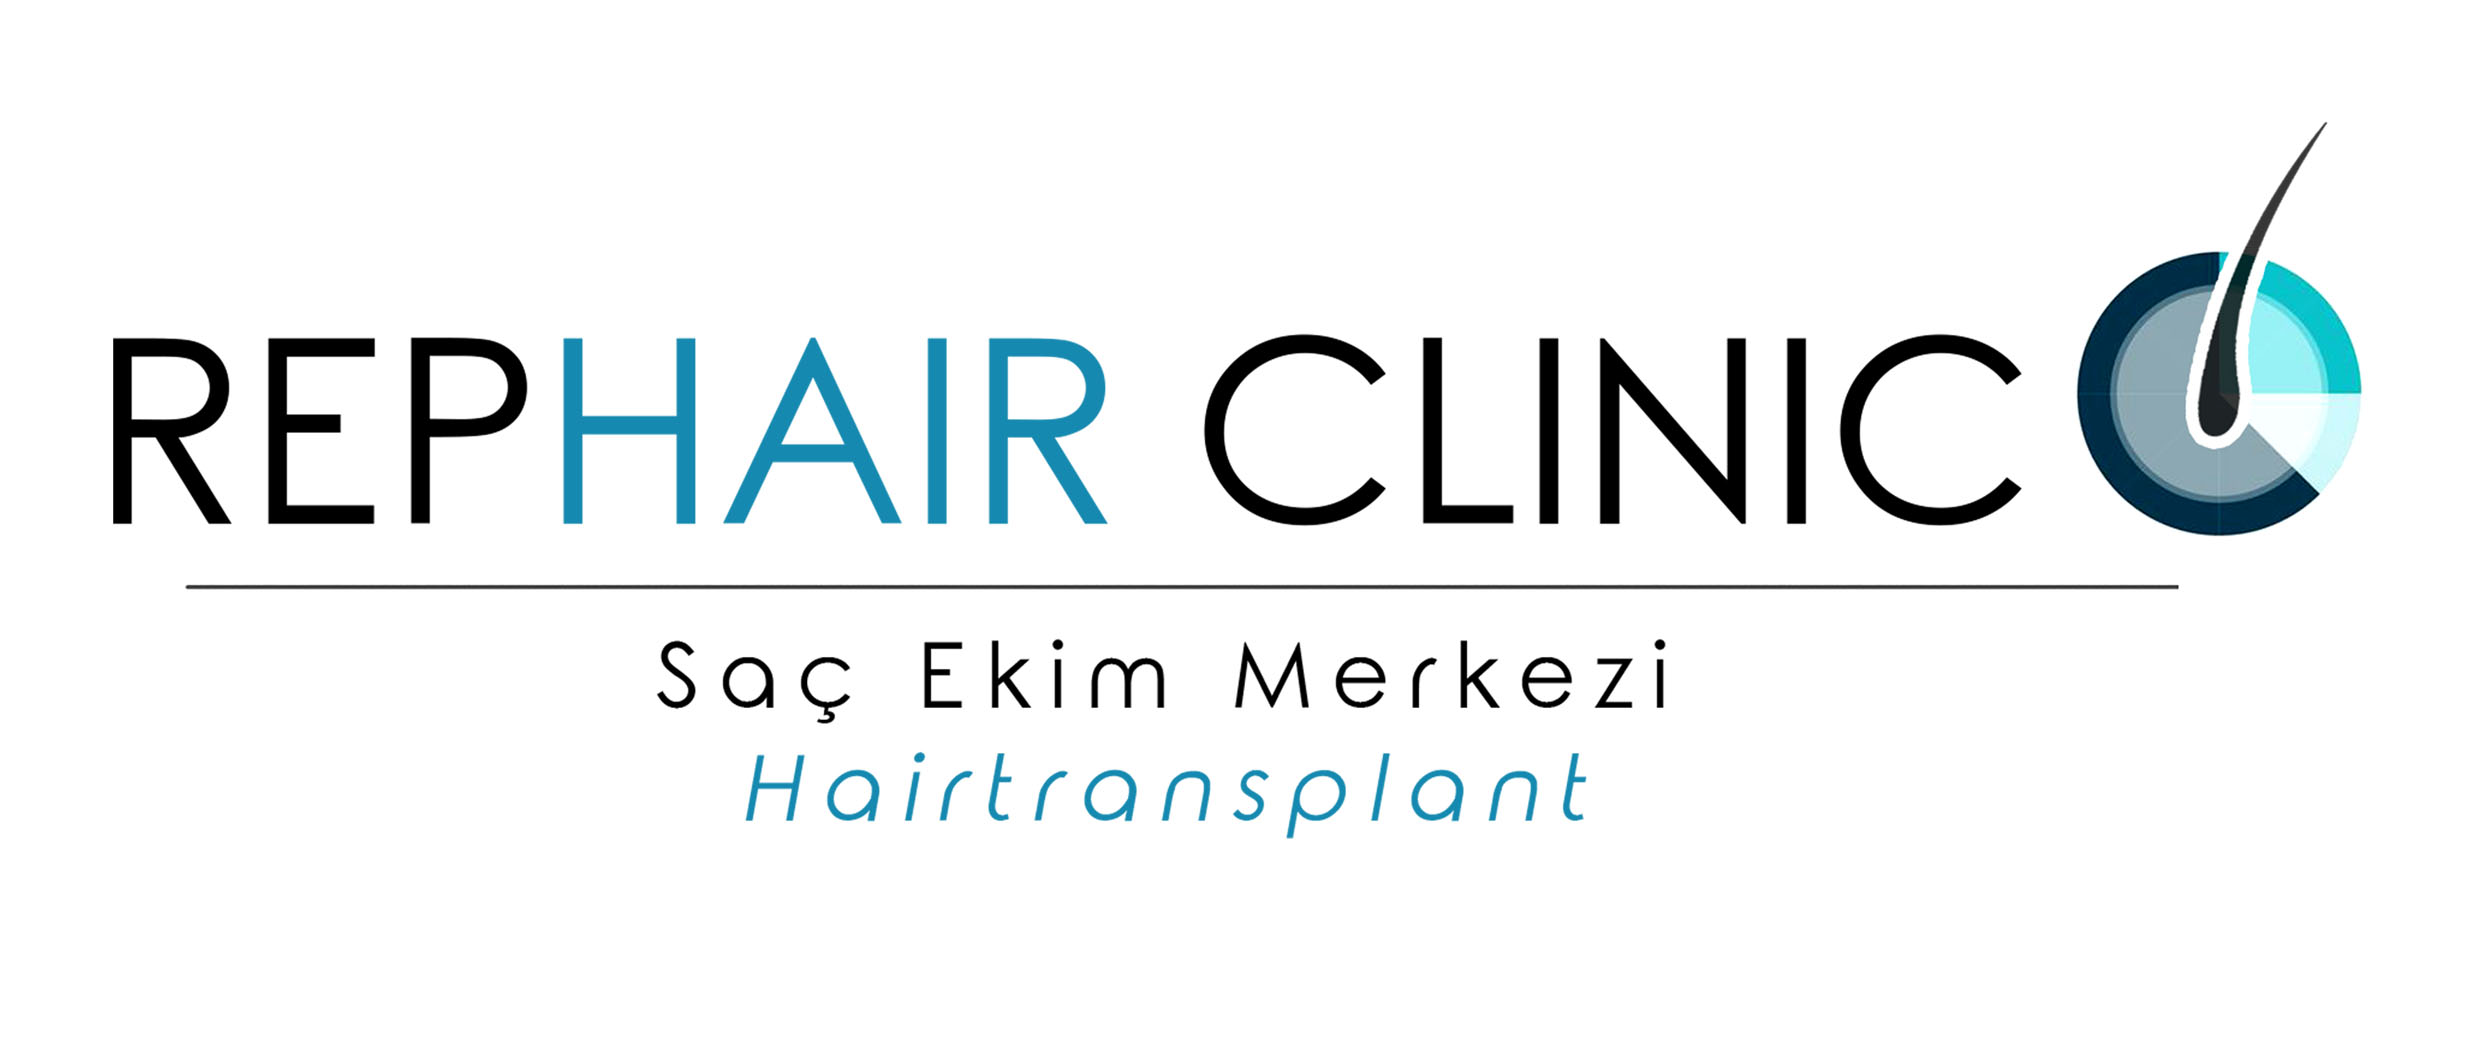 RepHair Clinic Istanbul Figures Among Top Hair Transplant Clinics for FUE Treatment